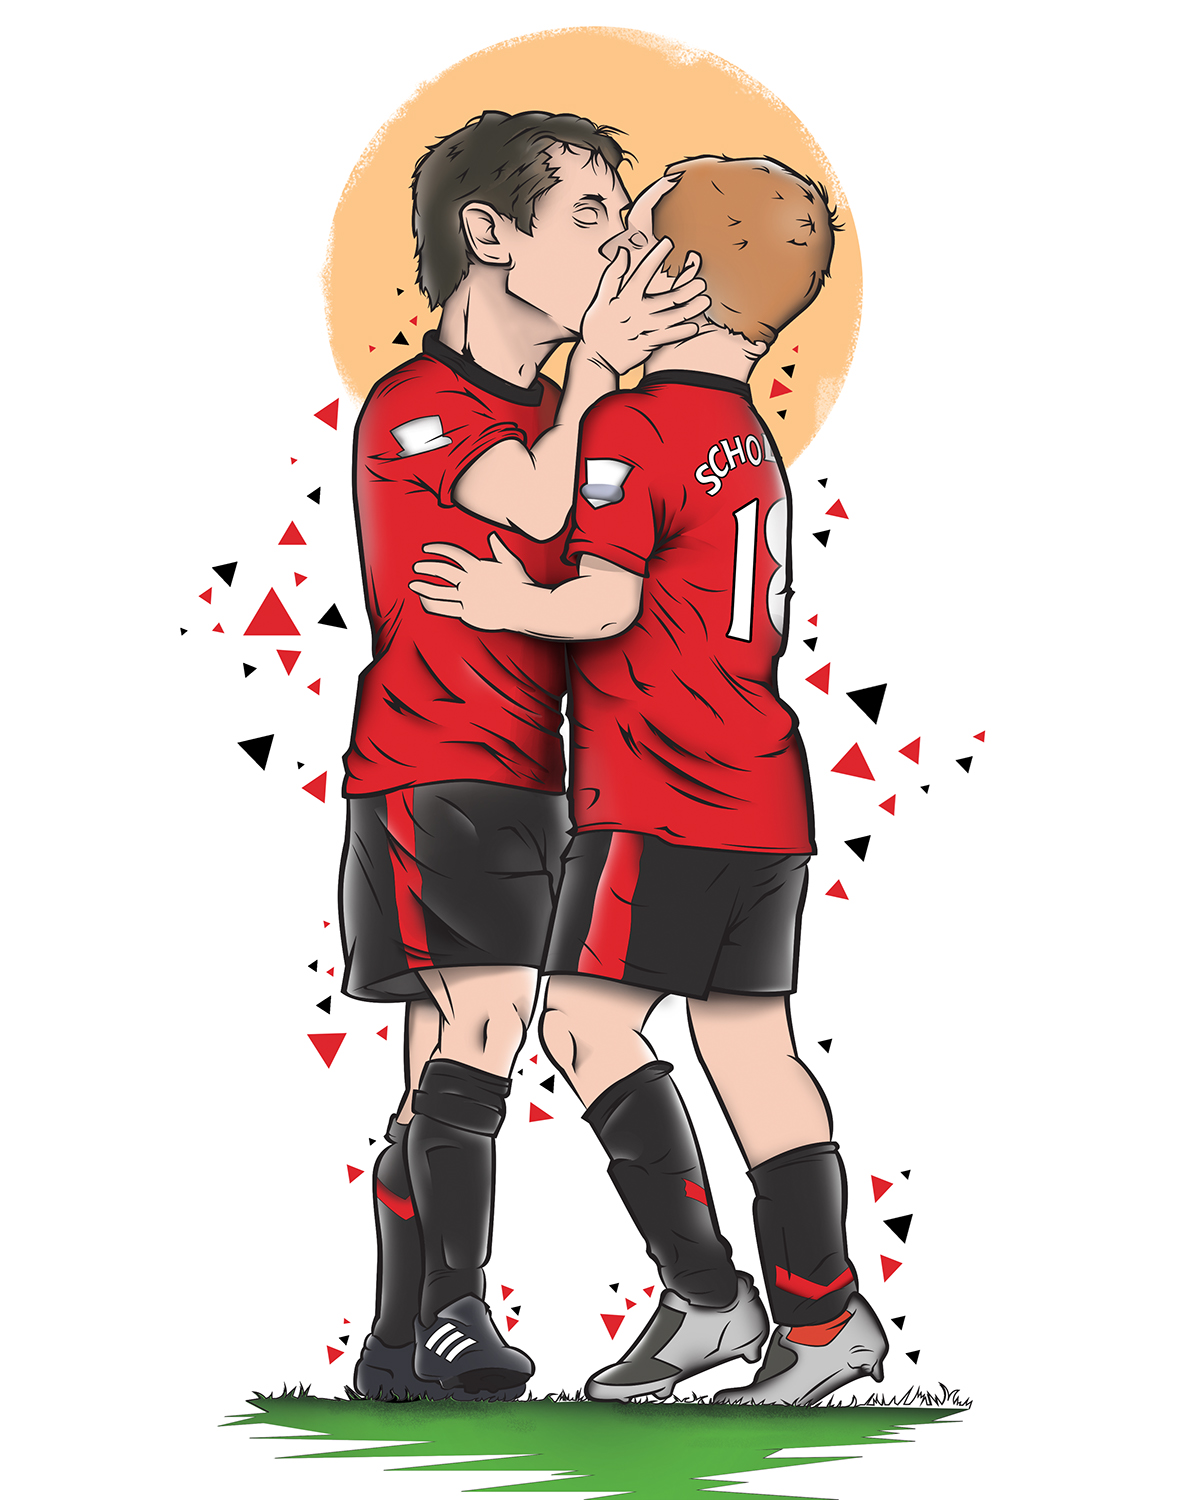 Gary Neville and Paul Scholes derby day kiss on Behance